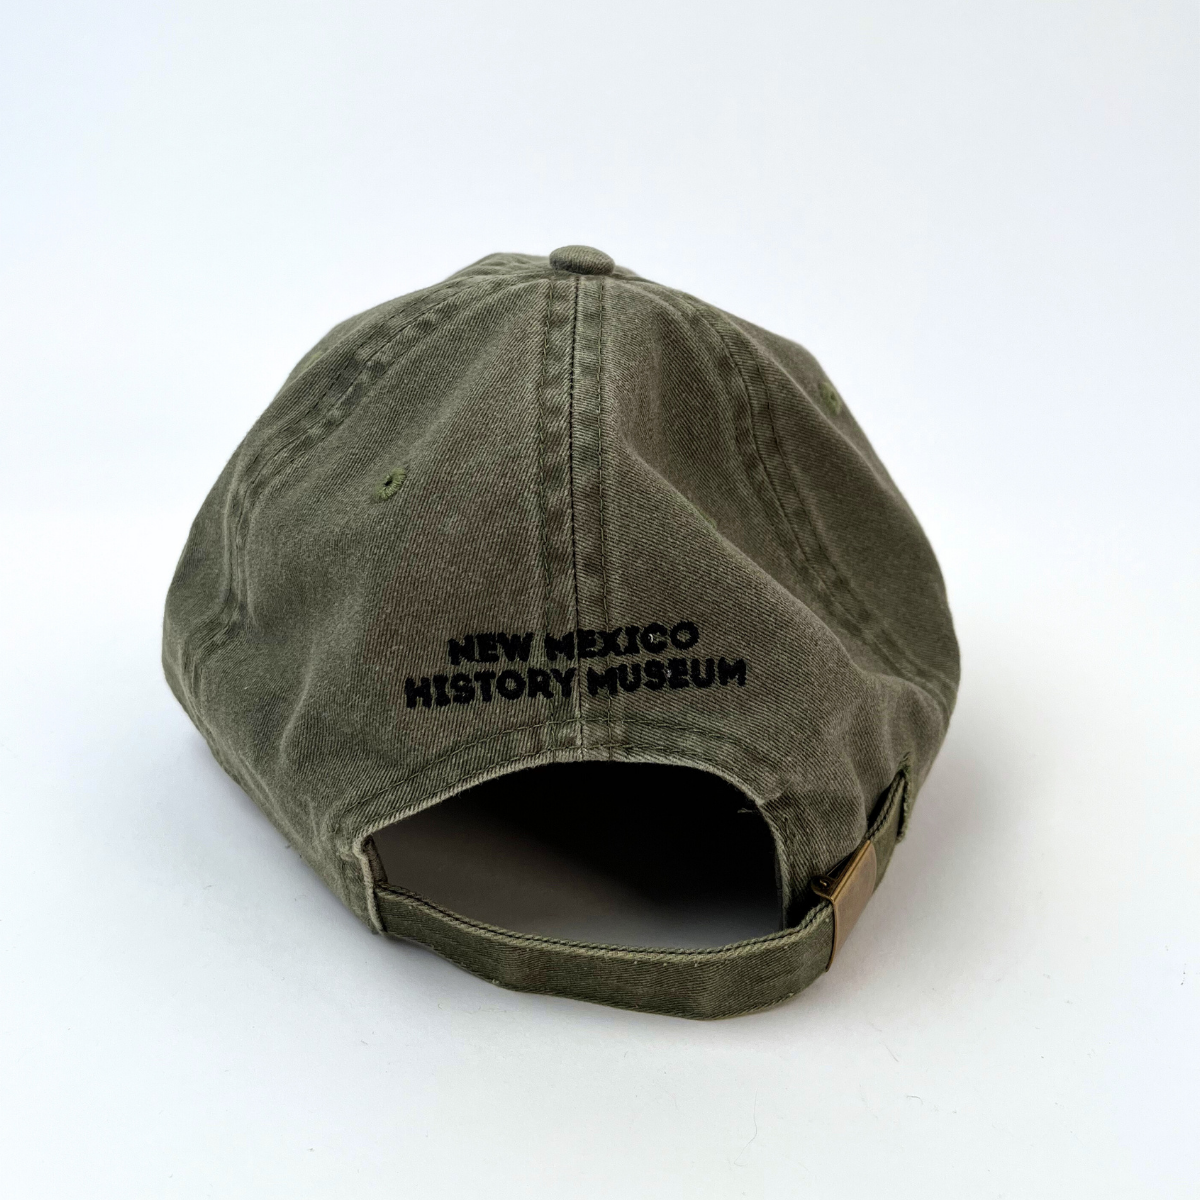 Palace of the Governors Anniversary Cap Olive